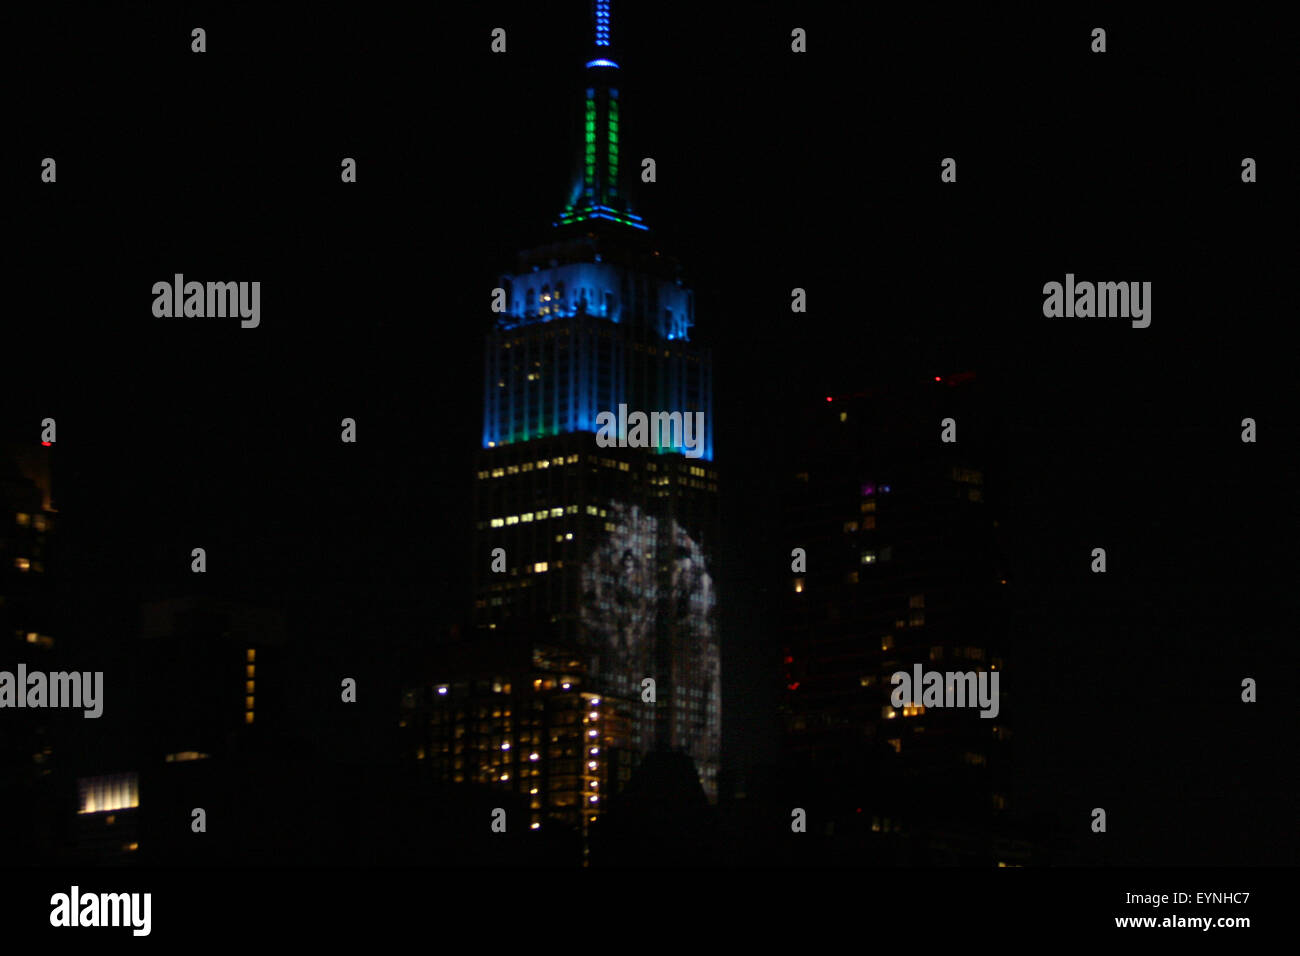 New York City, USA. 1st Aug, 2015. Digital images of endangered species are projected onto the south face of New York City's Empire State Building on Saturday evening.  The project, entitled #racingextinction, is the brainchild of filmmaker and photographer Louis Psihoyos and multimedia artist Travis Threlkel, and is designed to raise awareness of the plight of threatened creatures.  The collaborators refer to it as a "weapon of mass instruction."  The images were projected using 40 projectors of 20,000 lumens each. Credit:  Adam Stoltman/Alamy Live News Stock Photo